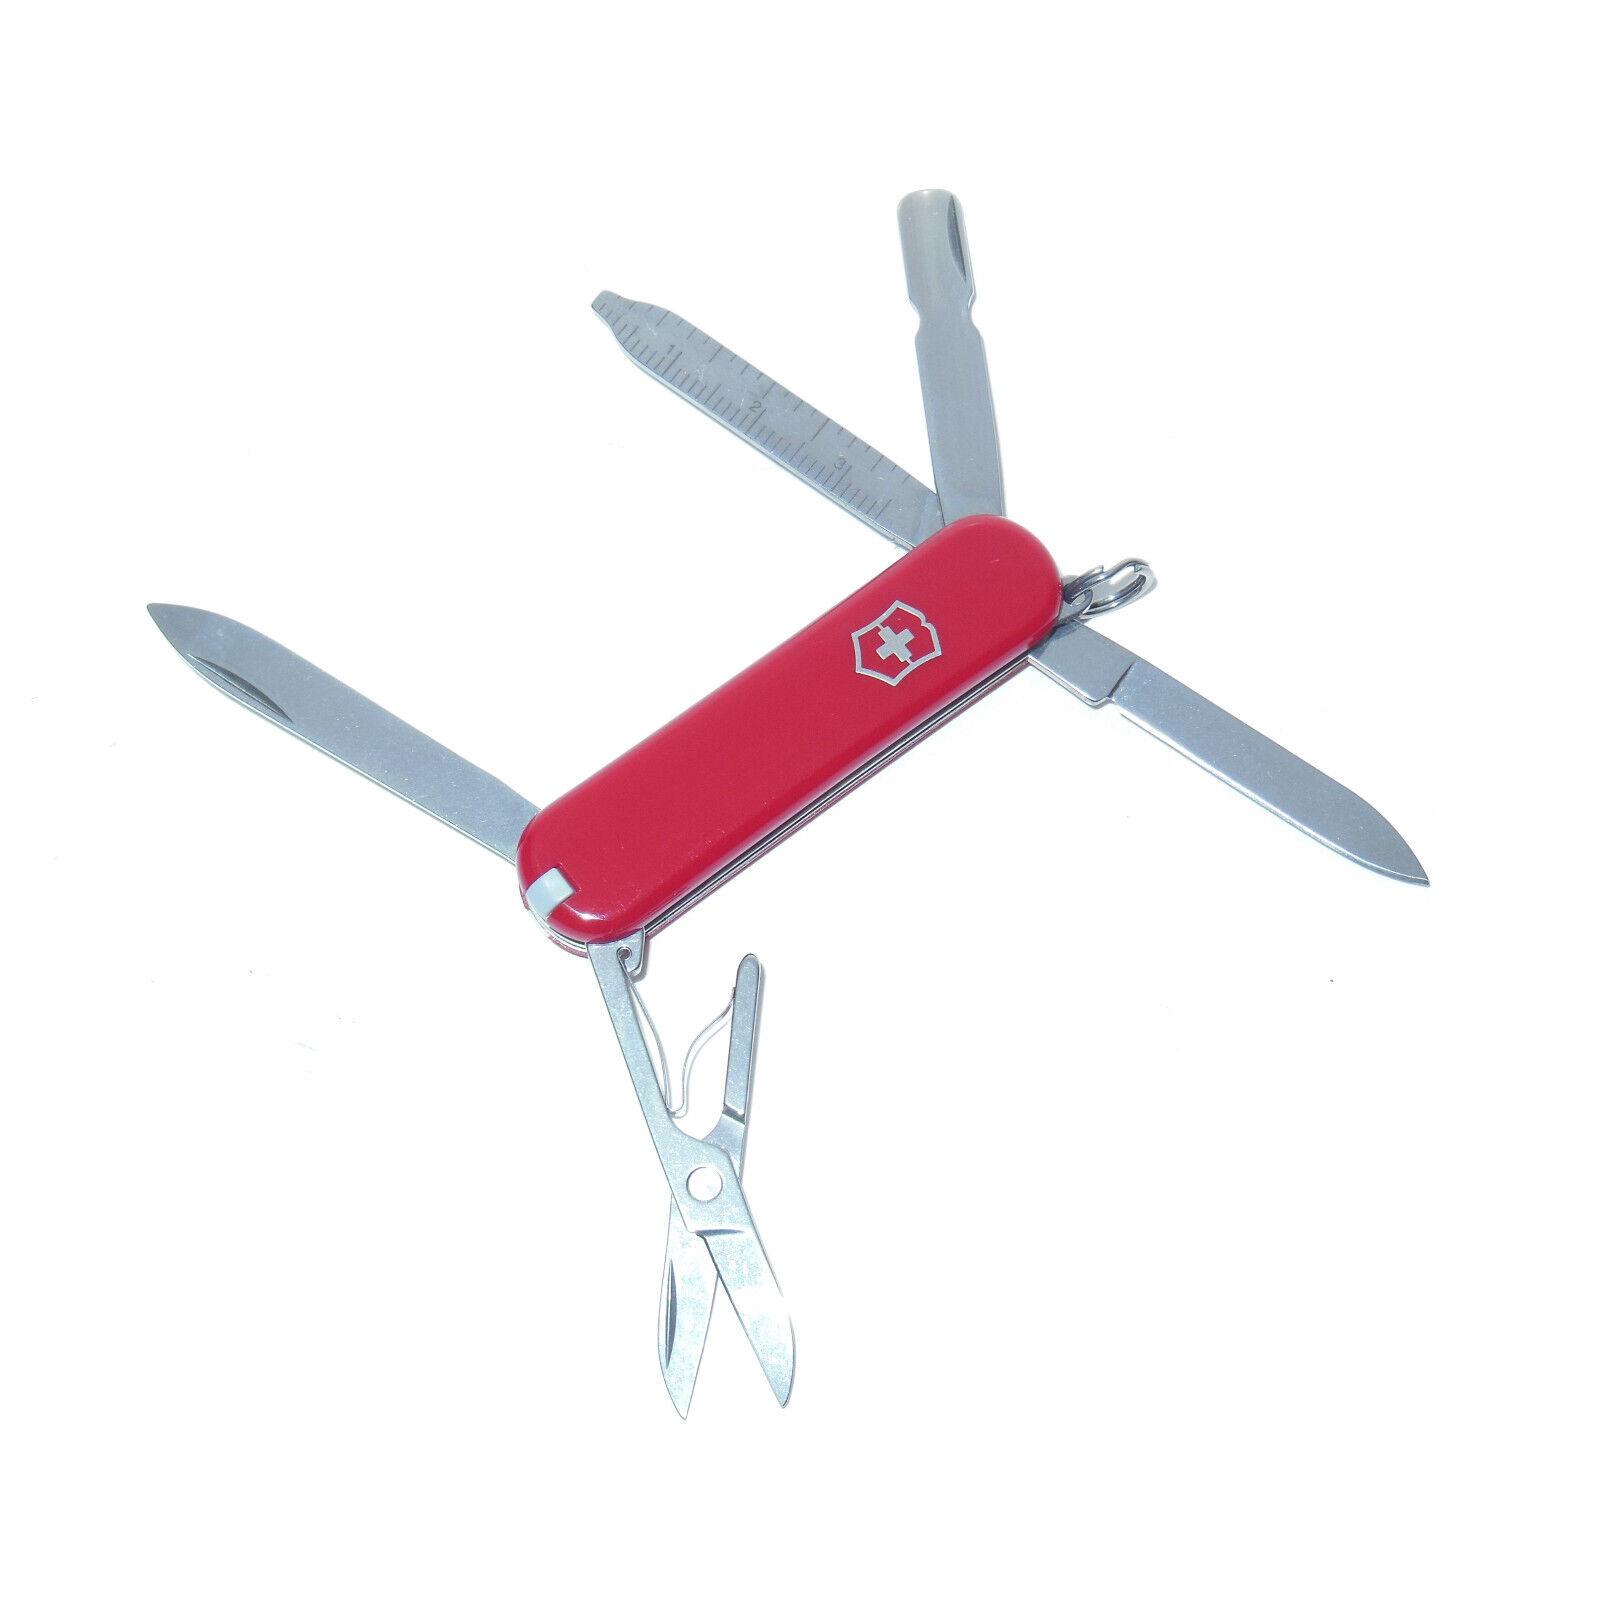 New Victorinox Swiss Army Knife Cavalier 58mm Multi Tool Red 53952 Discontinued